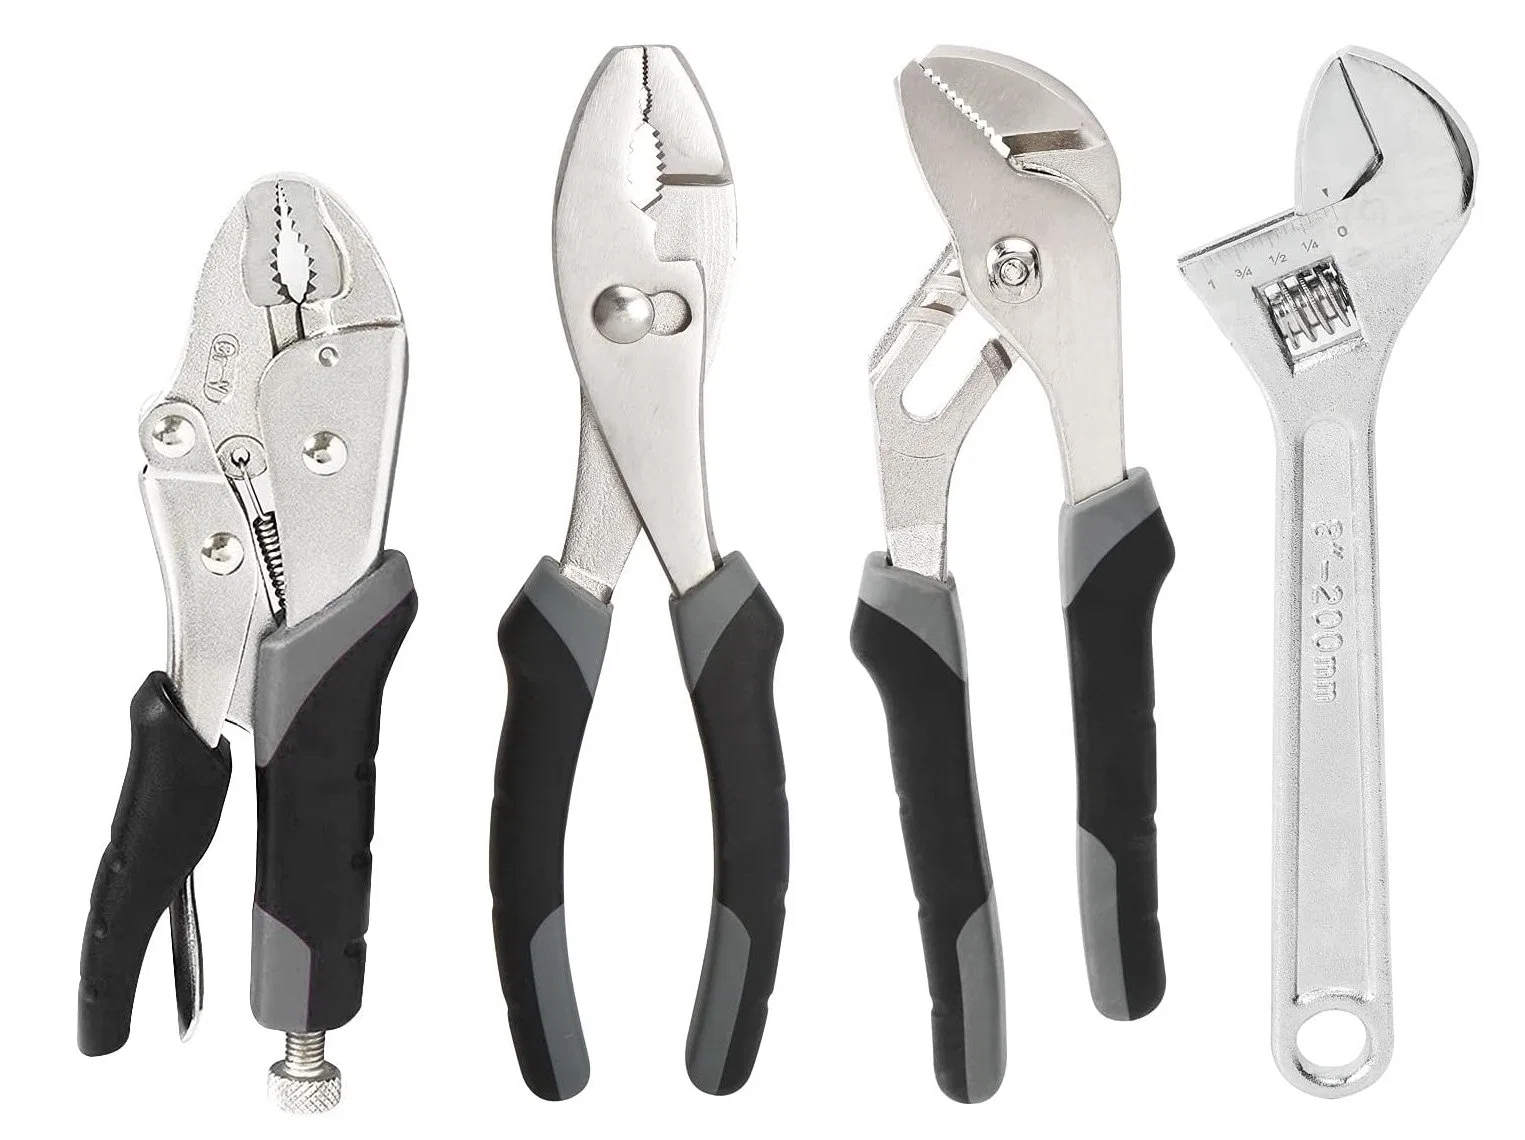 Professional OEM Factory 4-Piece Pliers Set with Pliers and Adjustable Wrench for General Household Repairs